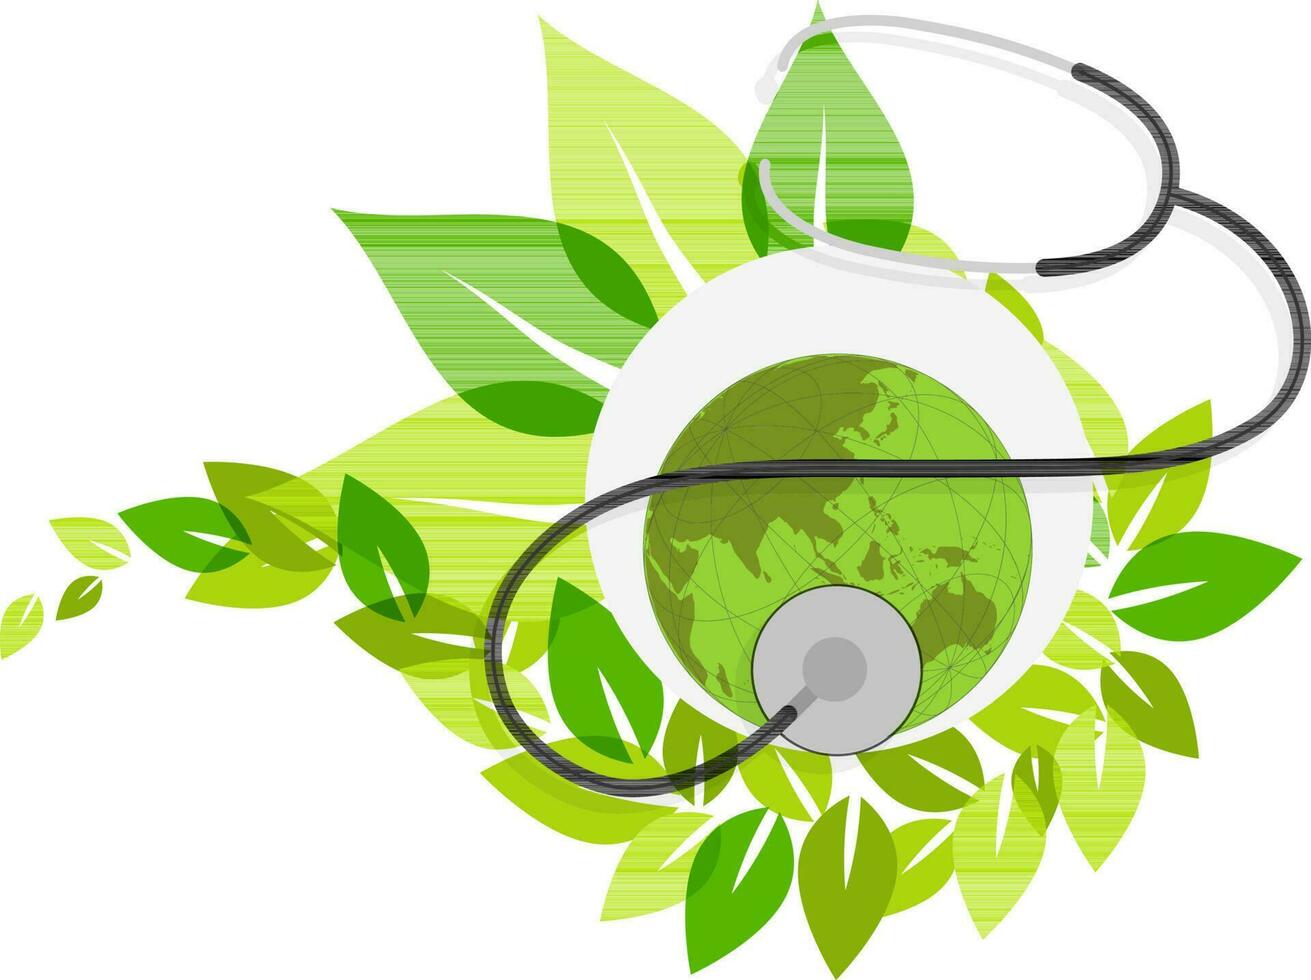 Earth globe with stethoscope on green leaves. vector